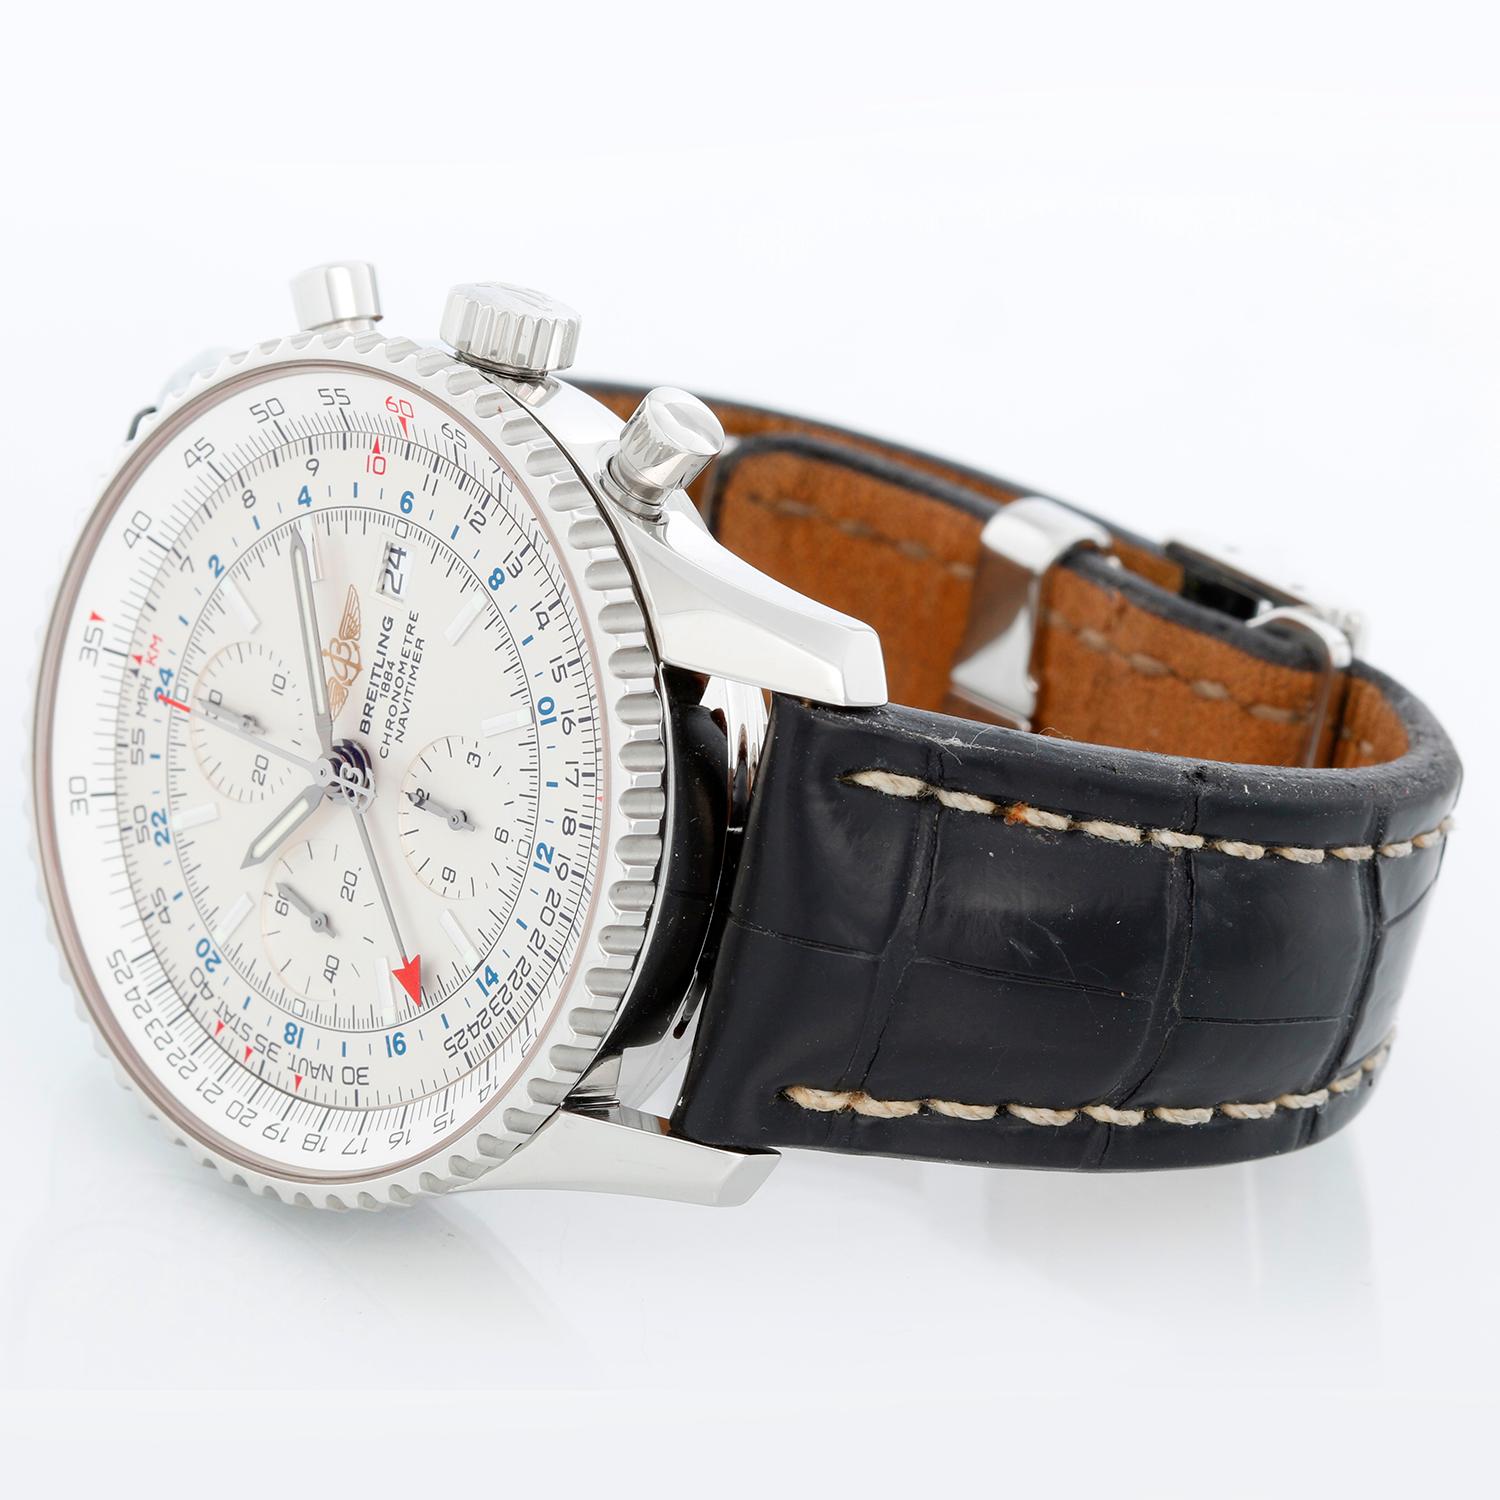 Breitling Navitimer World Chronograph Men's Steel Watch A24322 - Automatic winding; chronograph; dual time. Stainless steel case with bidirectional rotating slide-rule bezel (46mm diameter). Silver dial with hour, minute and seconds recorders,